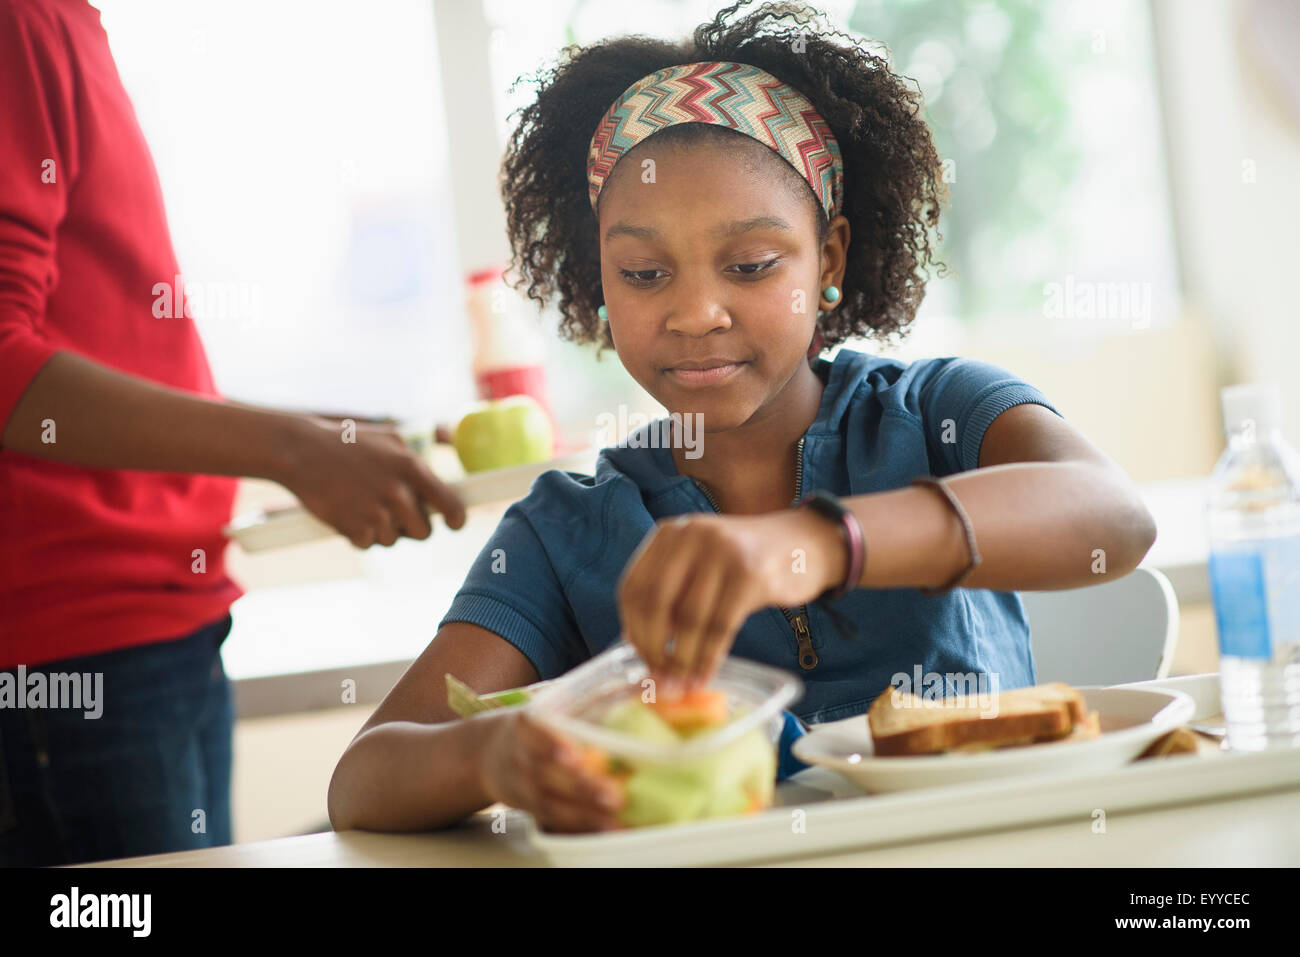 Black students eating lunch in school cafeteria Stock Photo